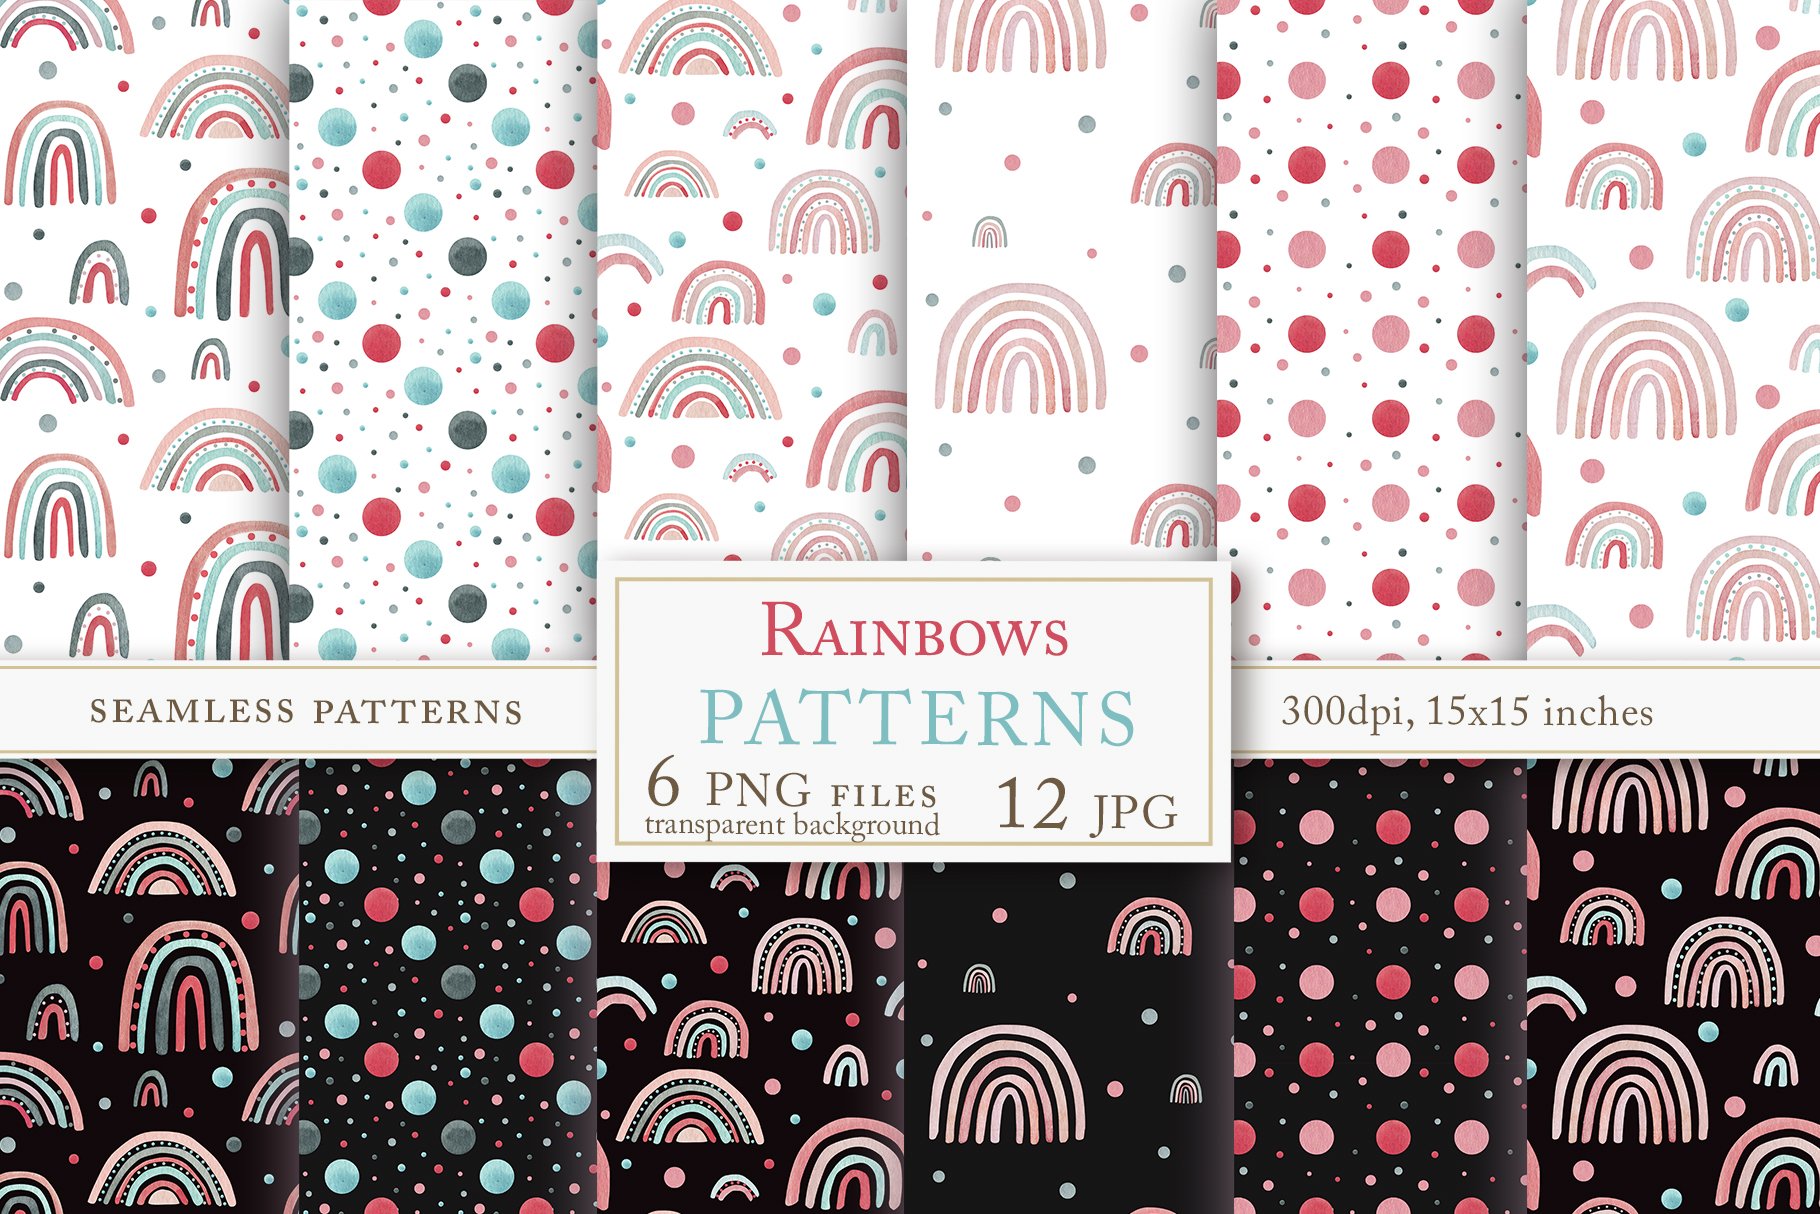 Watercolor RAINBOW patterns cover image.